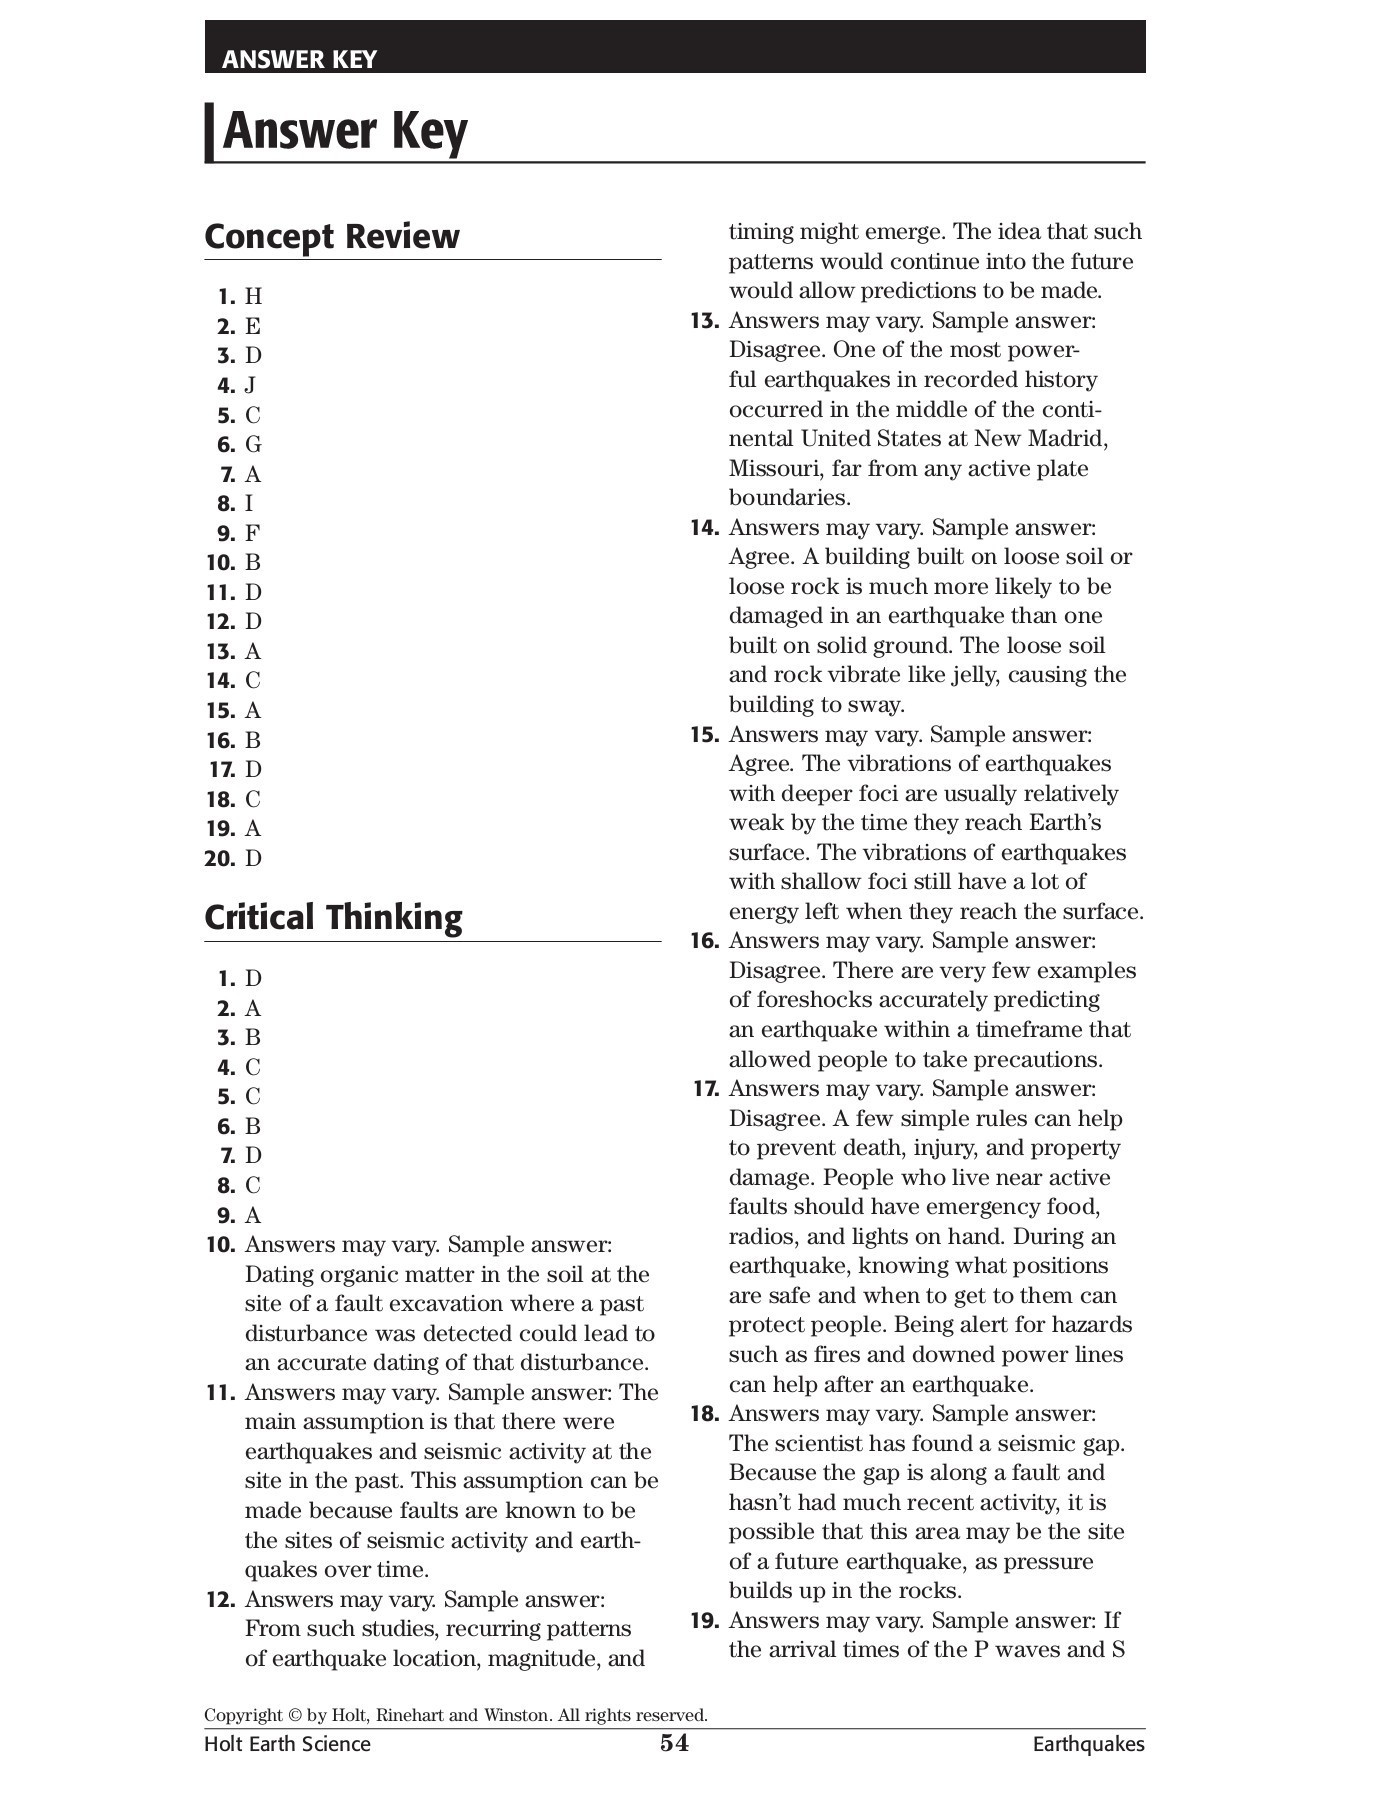 Science Skills Worksheet Answer Key Skills Worksheet Concept Review Pages 1 3 Text Version